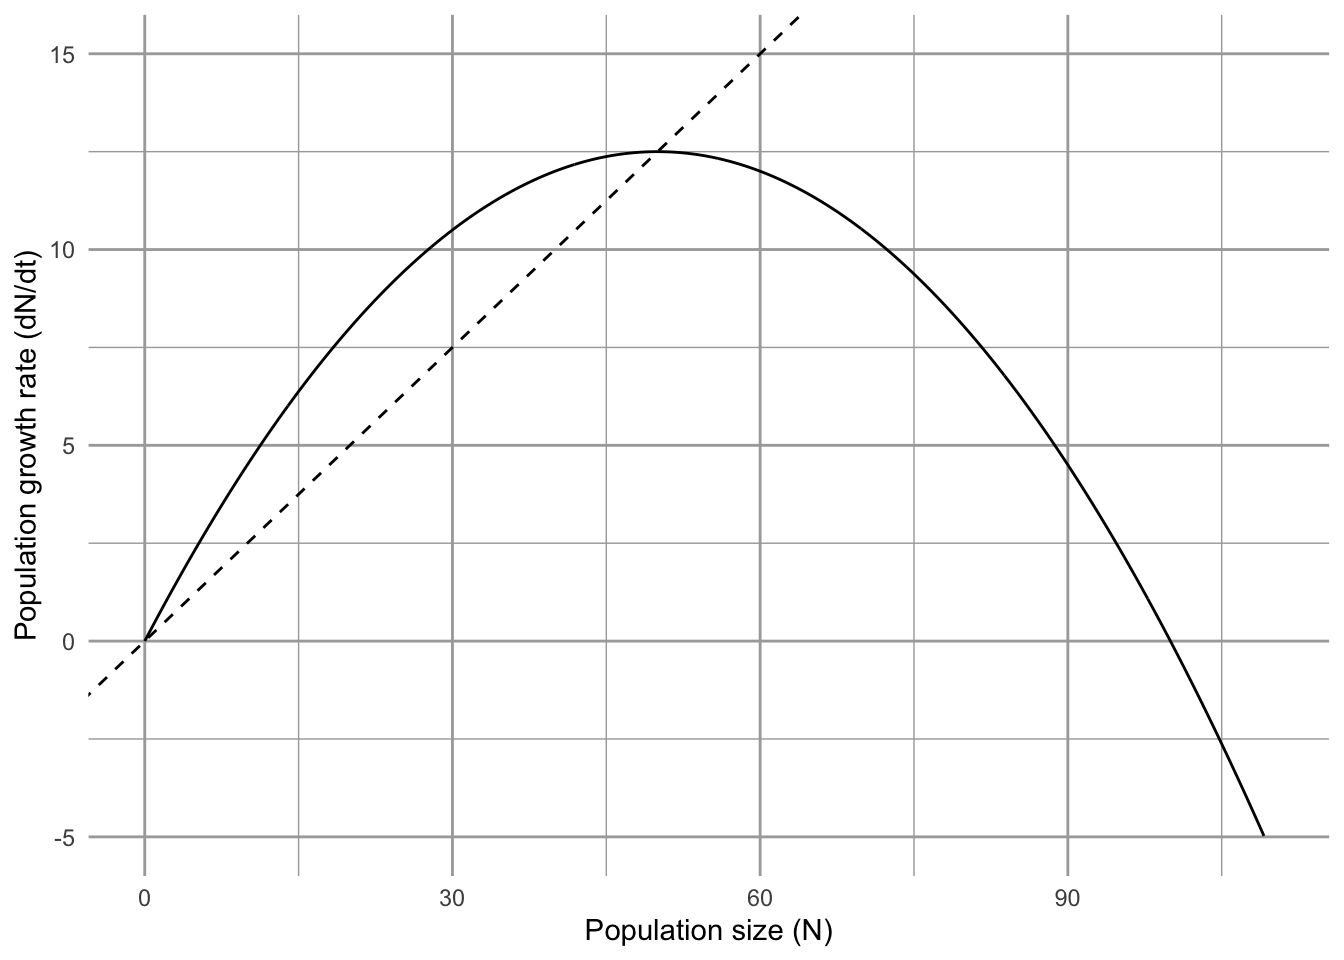 To find the predicted population growth rate with harvesting, we start with Logistic growth rate (solid line) and then substract harvest rate (dashed line) (left figure). This gives us population growth rate in the presence of harvesting (right figure).